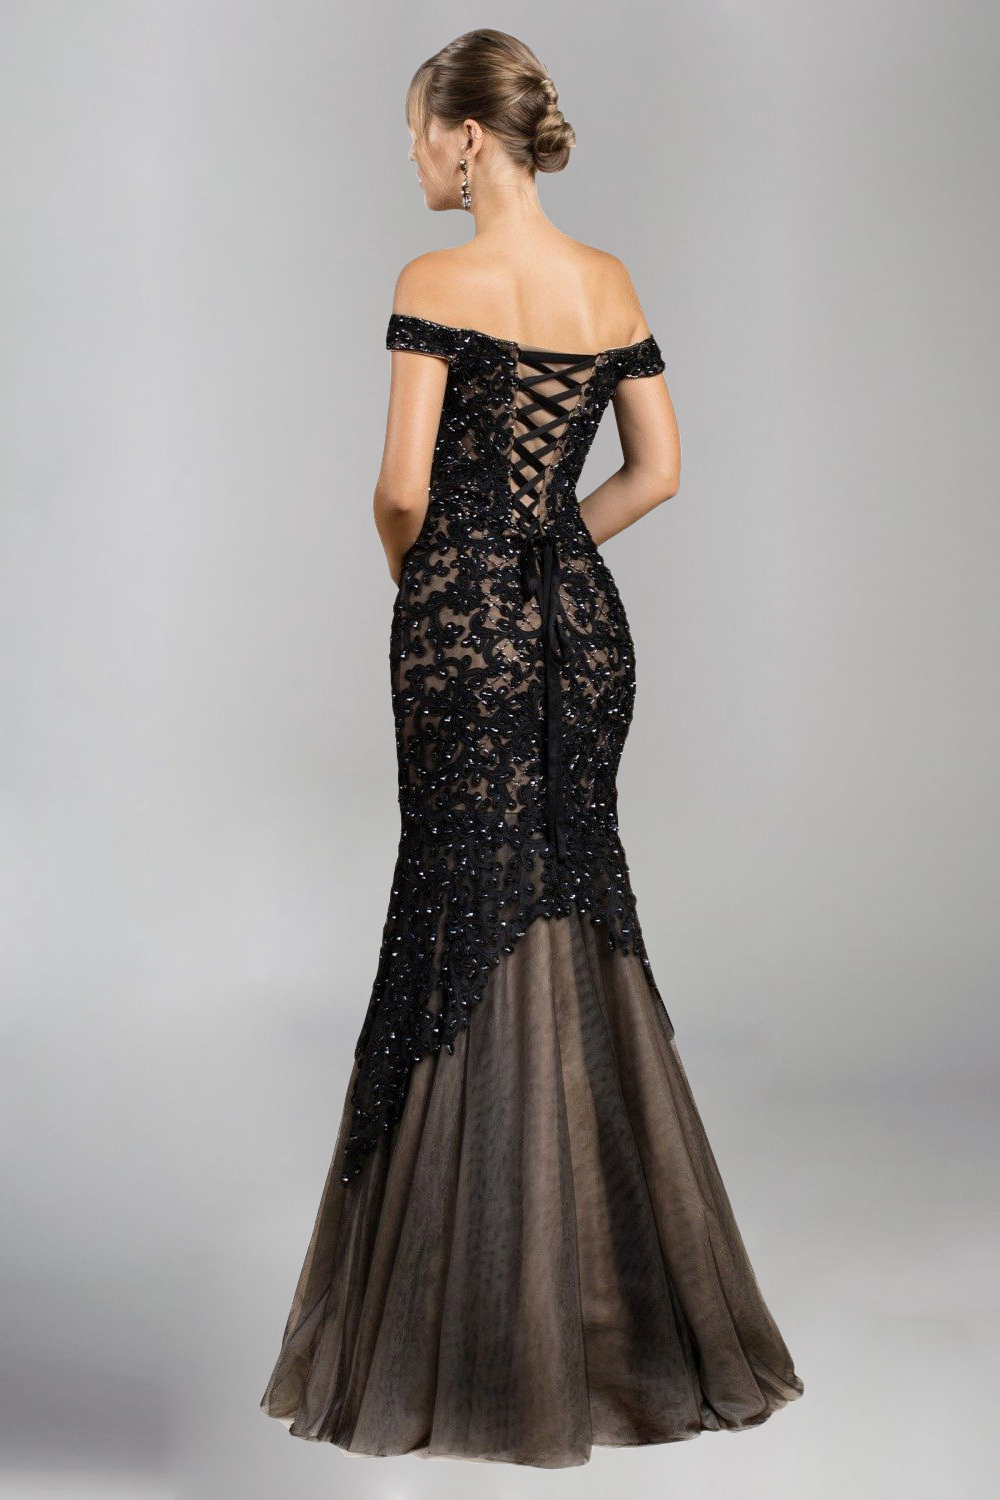 Off the Shoulder Mermaid Gown with Lace Overlay